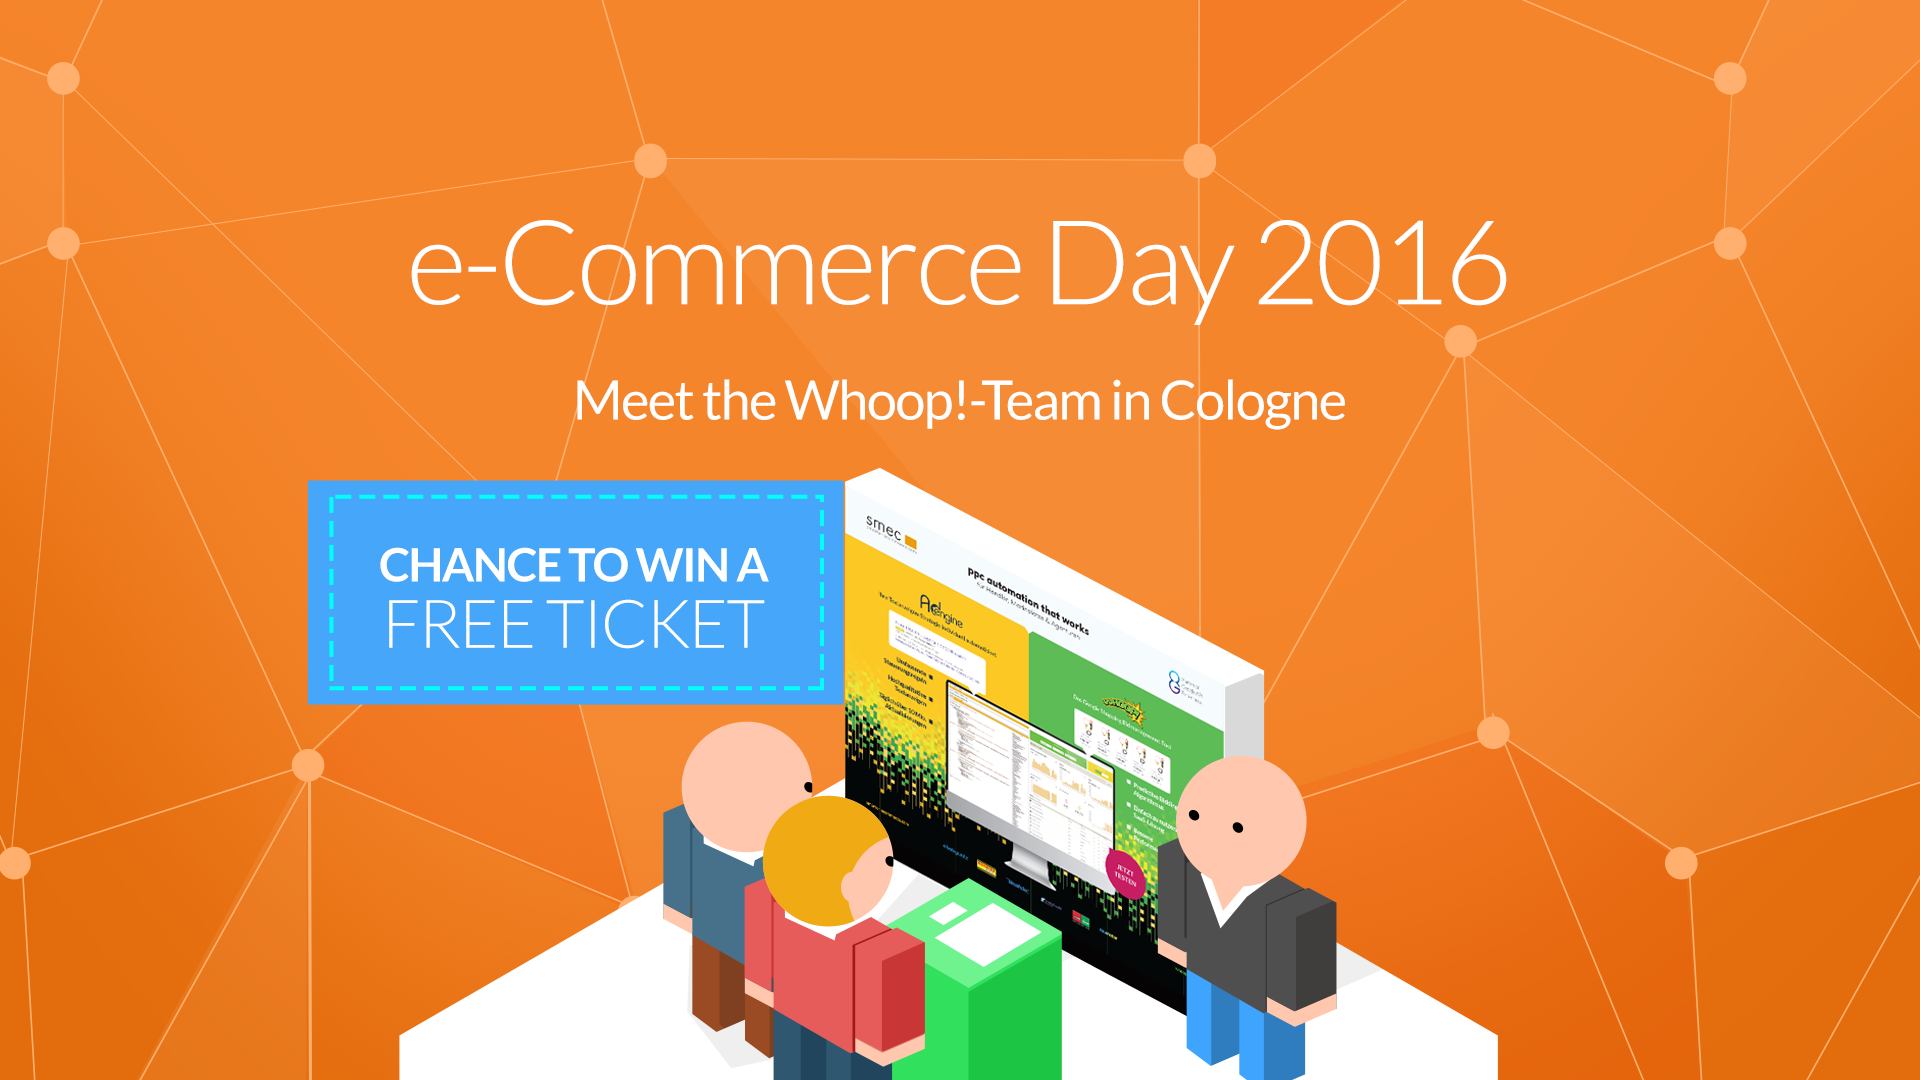 Win Tickets for the e-Commerce Day 2016